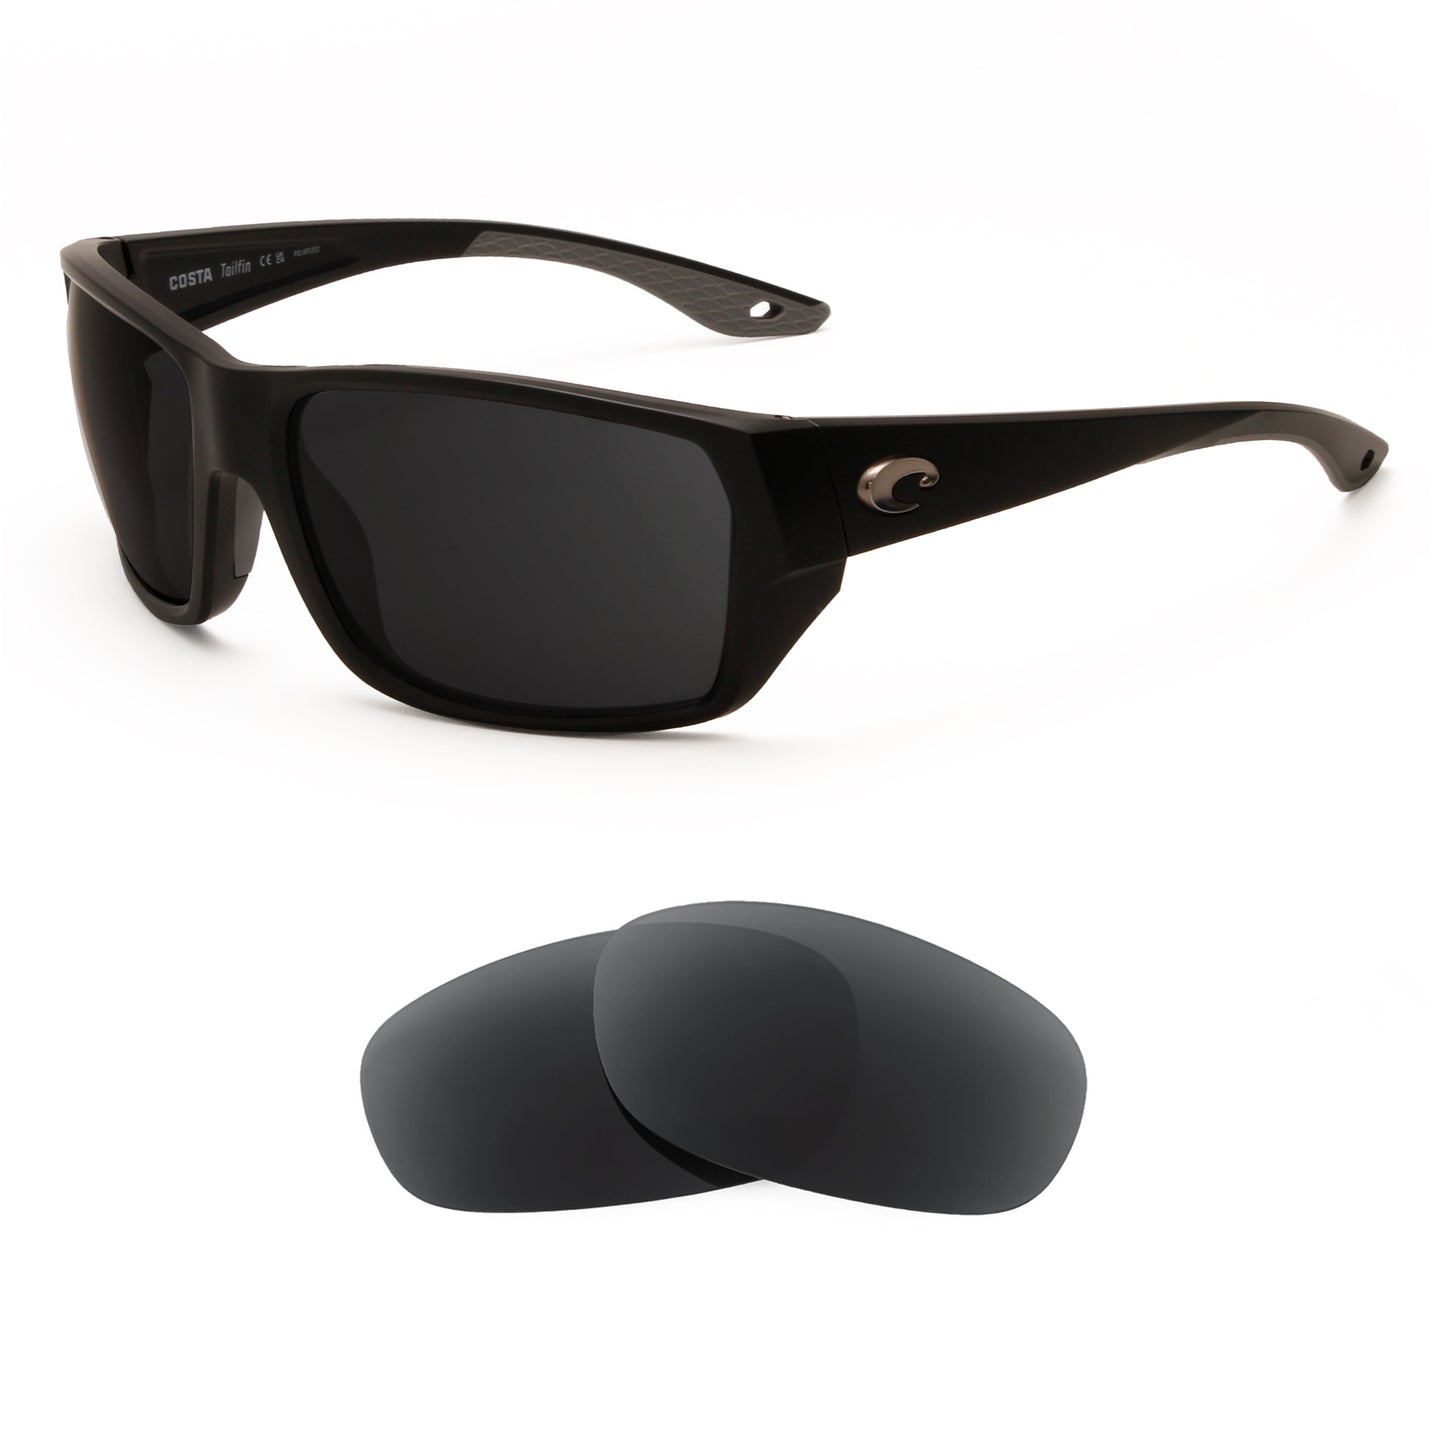 Costa Tailfin 60mm sunglasses with replacement lenses